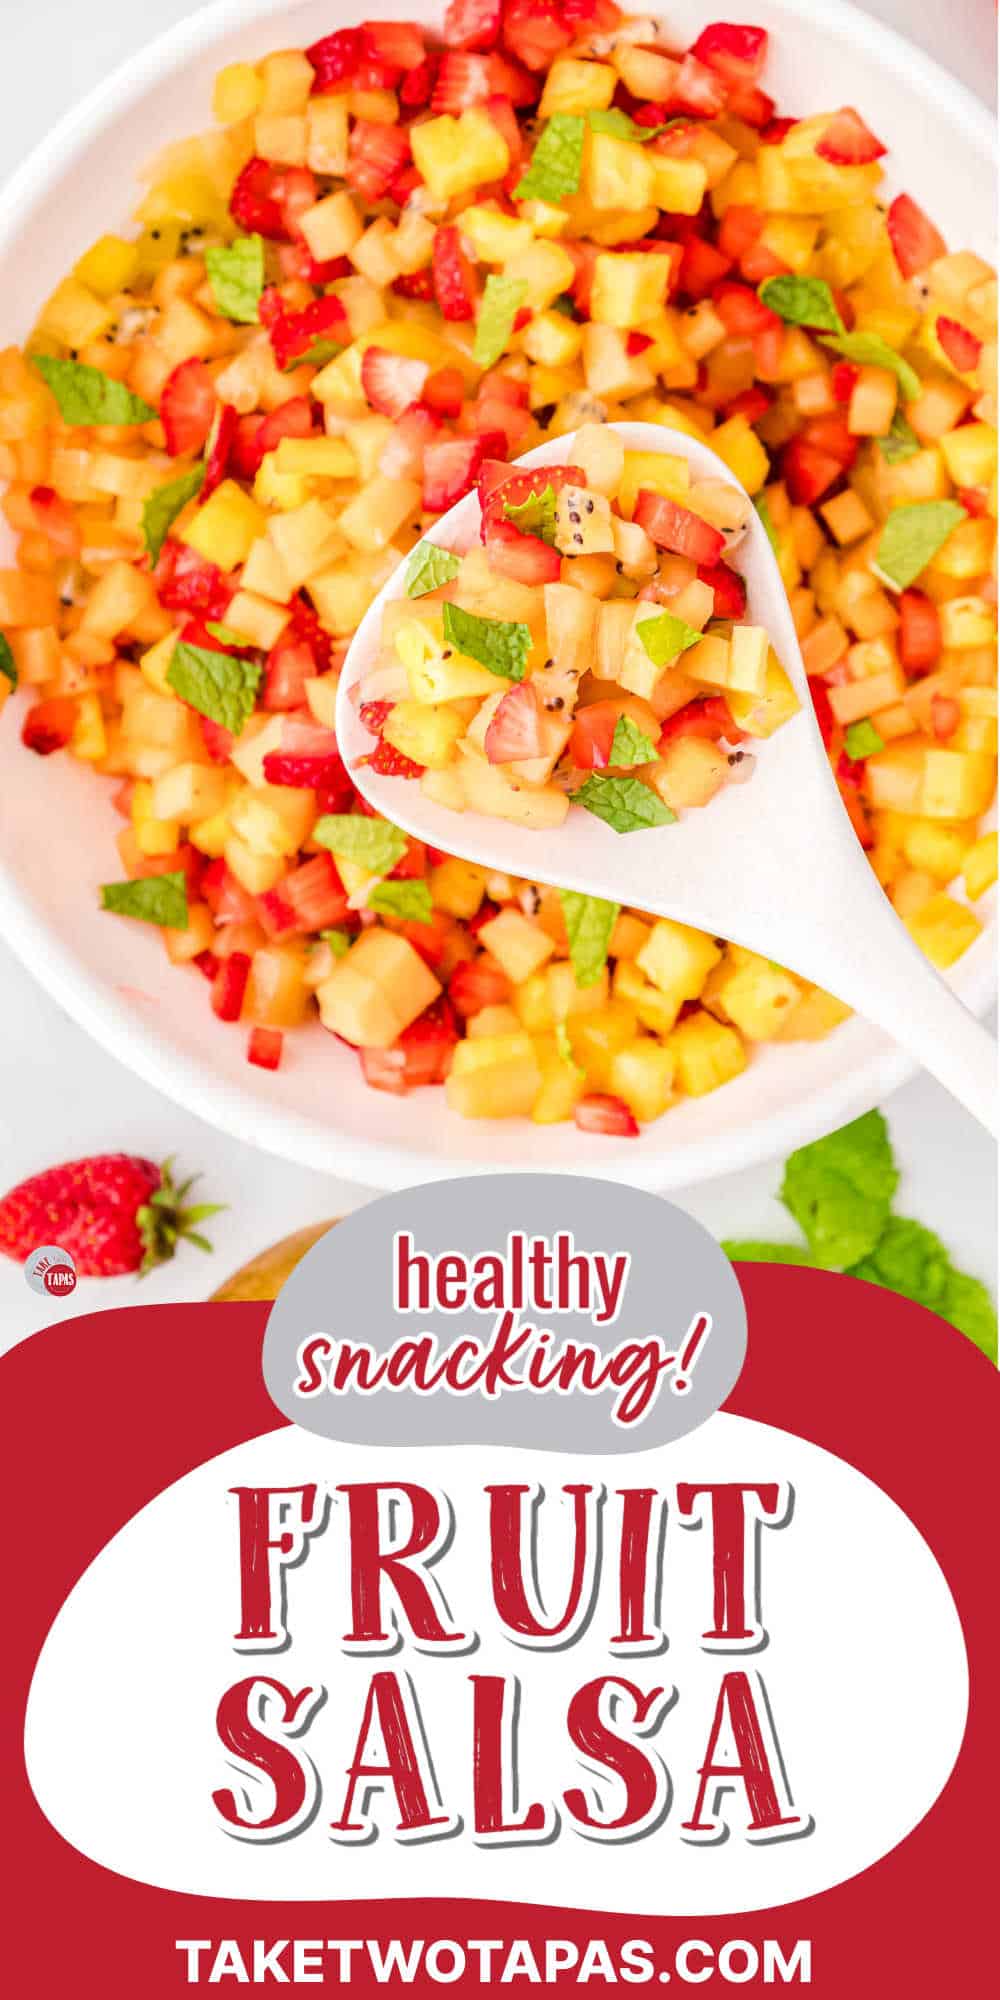 spoon of fruit salsa with red banner and text